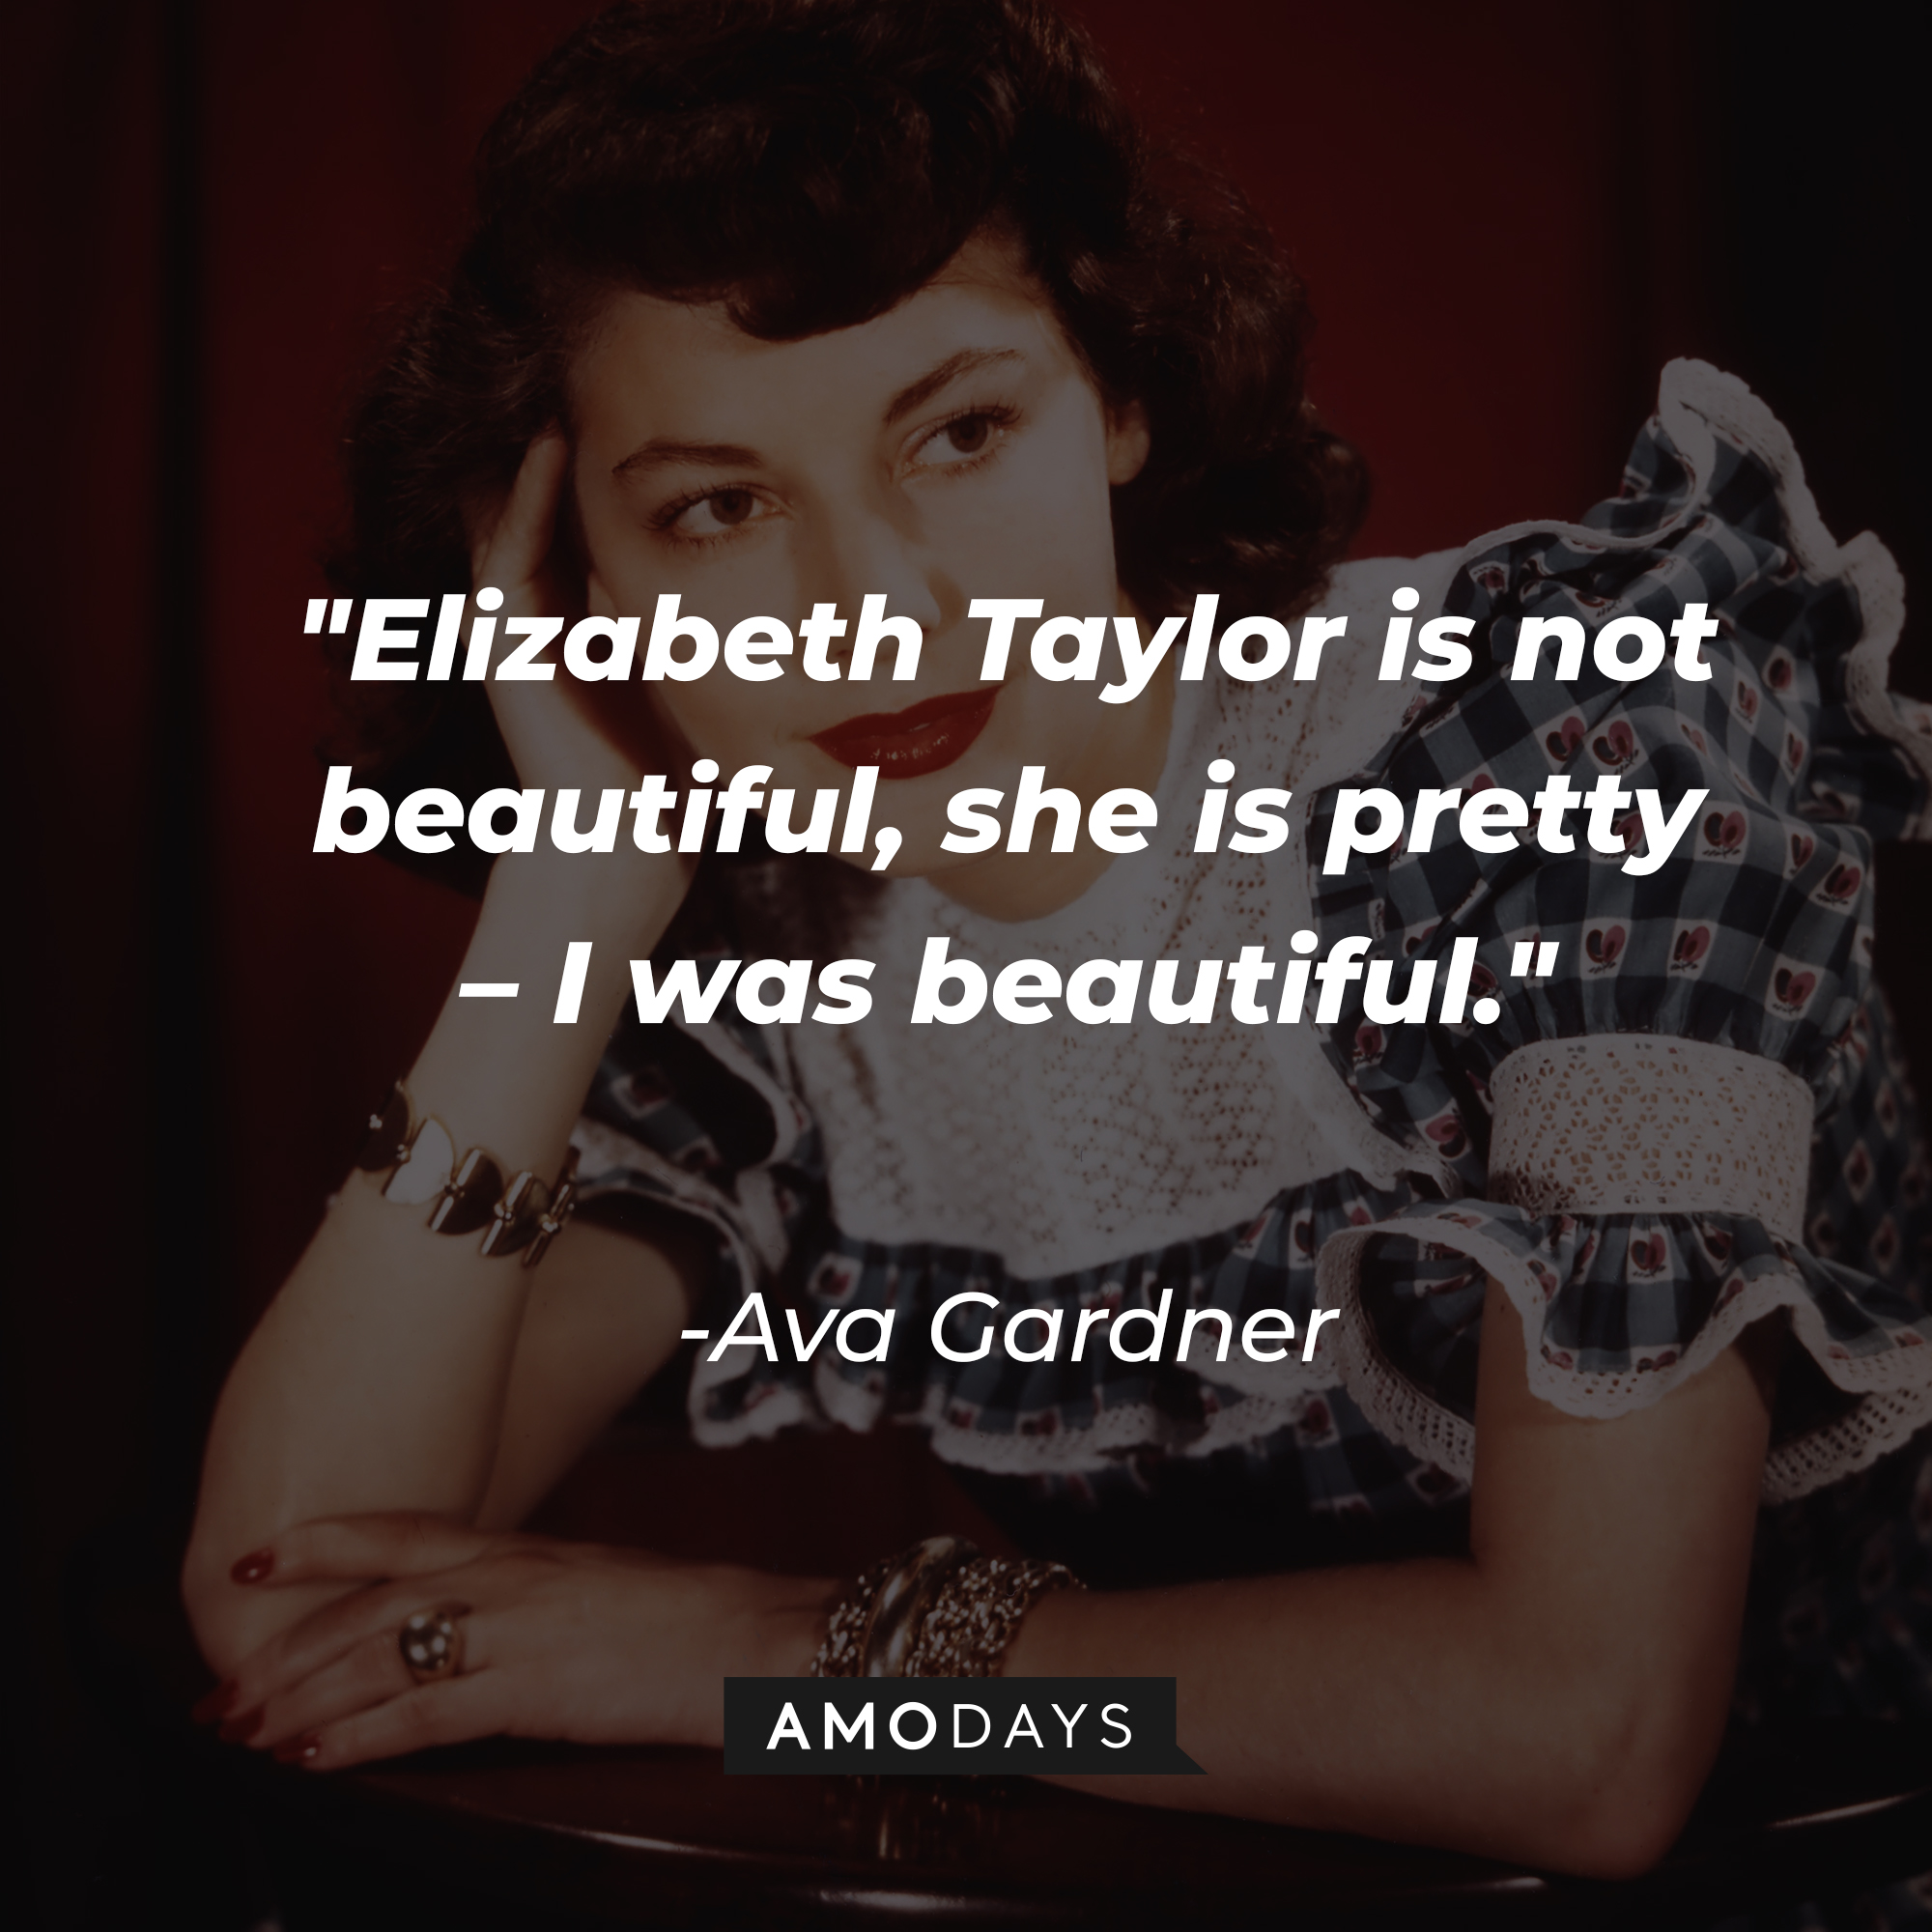 Ava Gardner with her quote: “Elizabeth Taylor is not beautiful, she is pretty – I was beautiful.” | Source: Getty Images